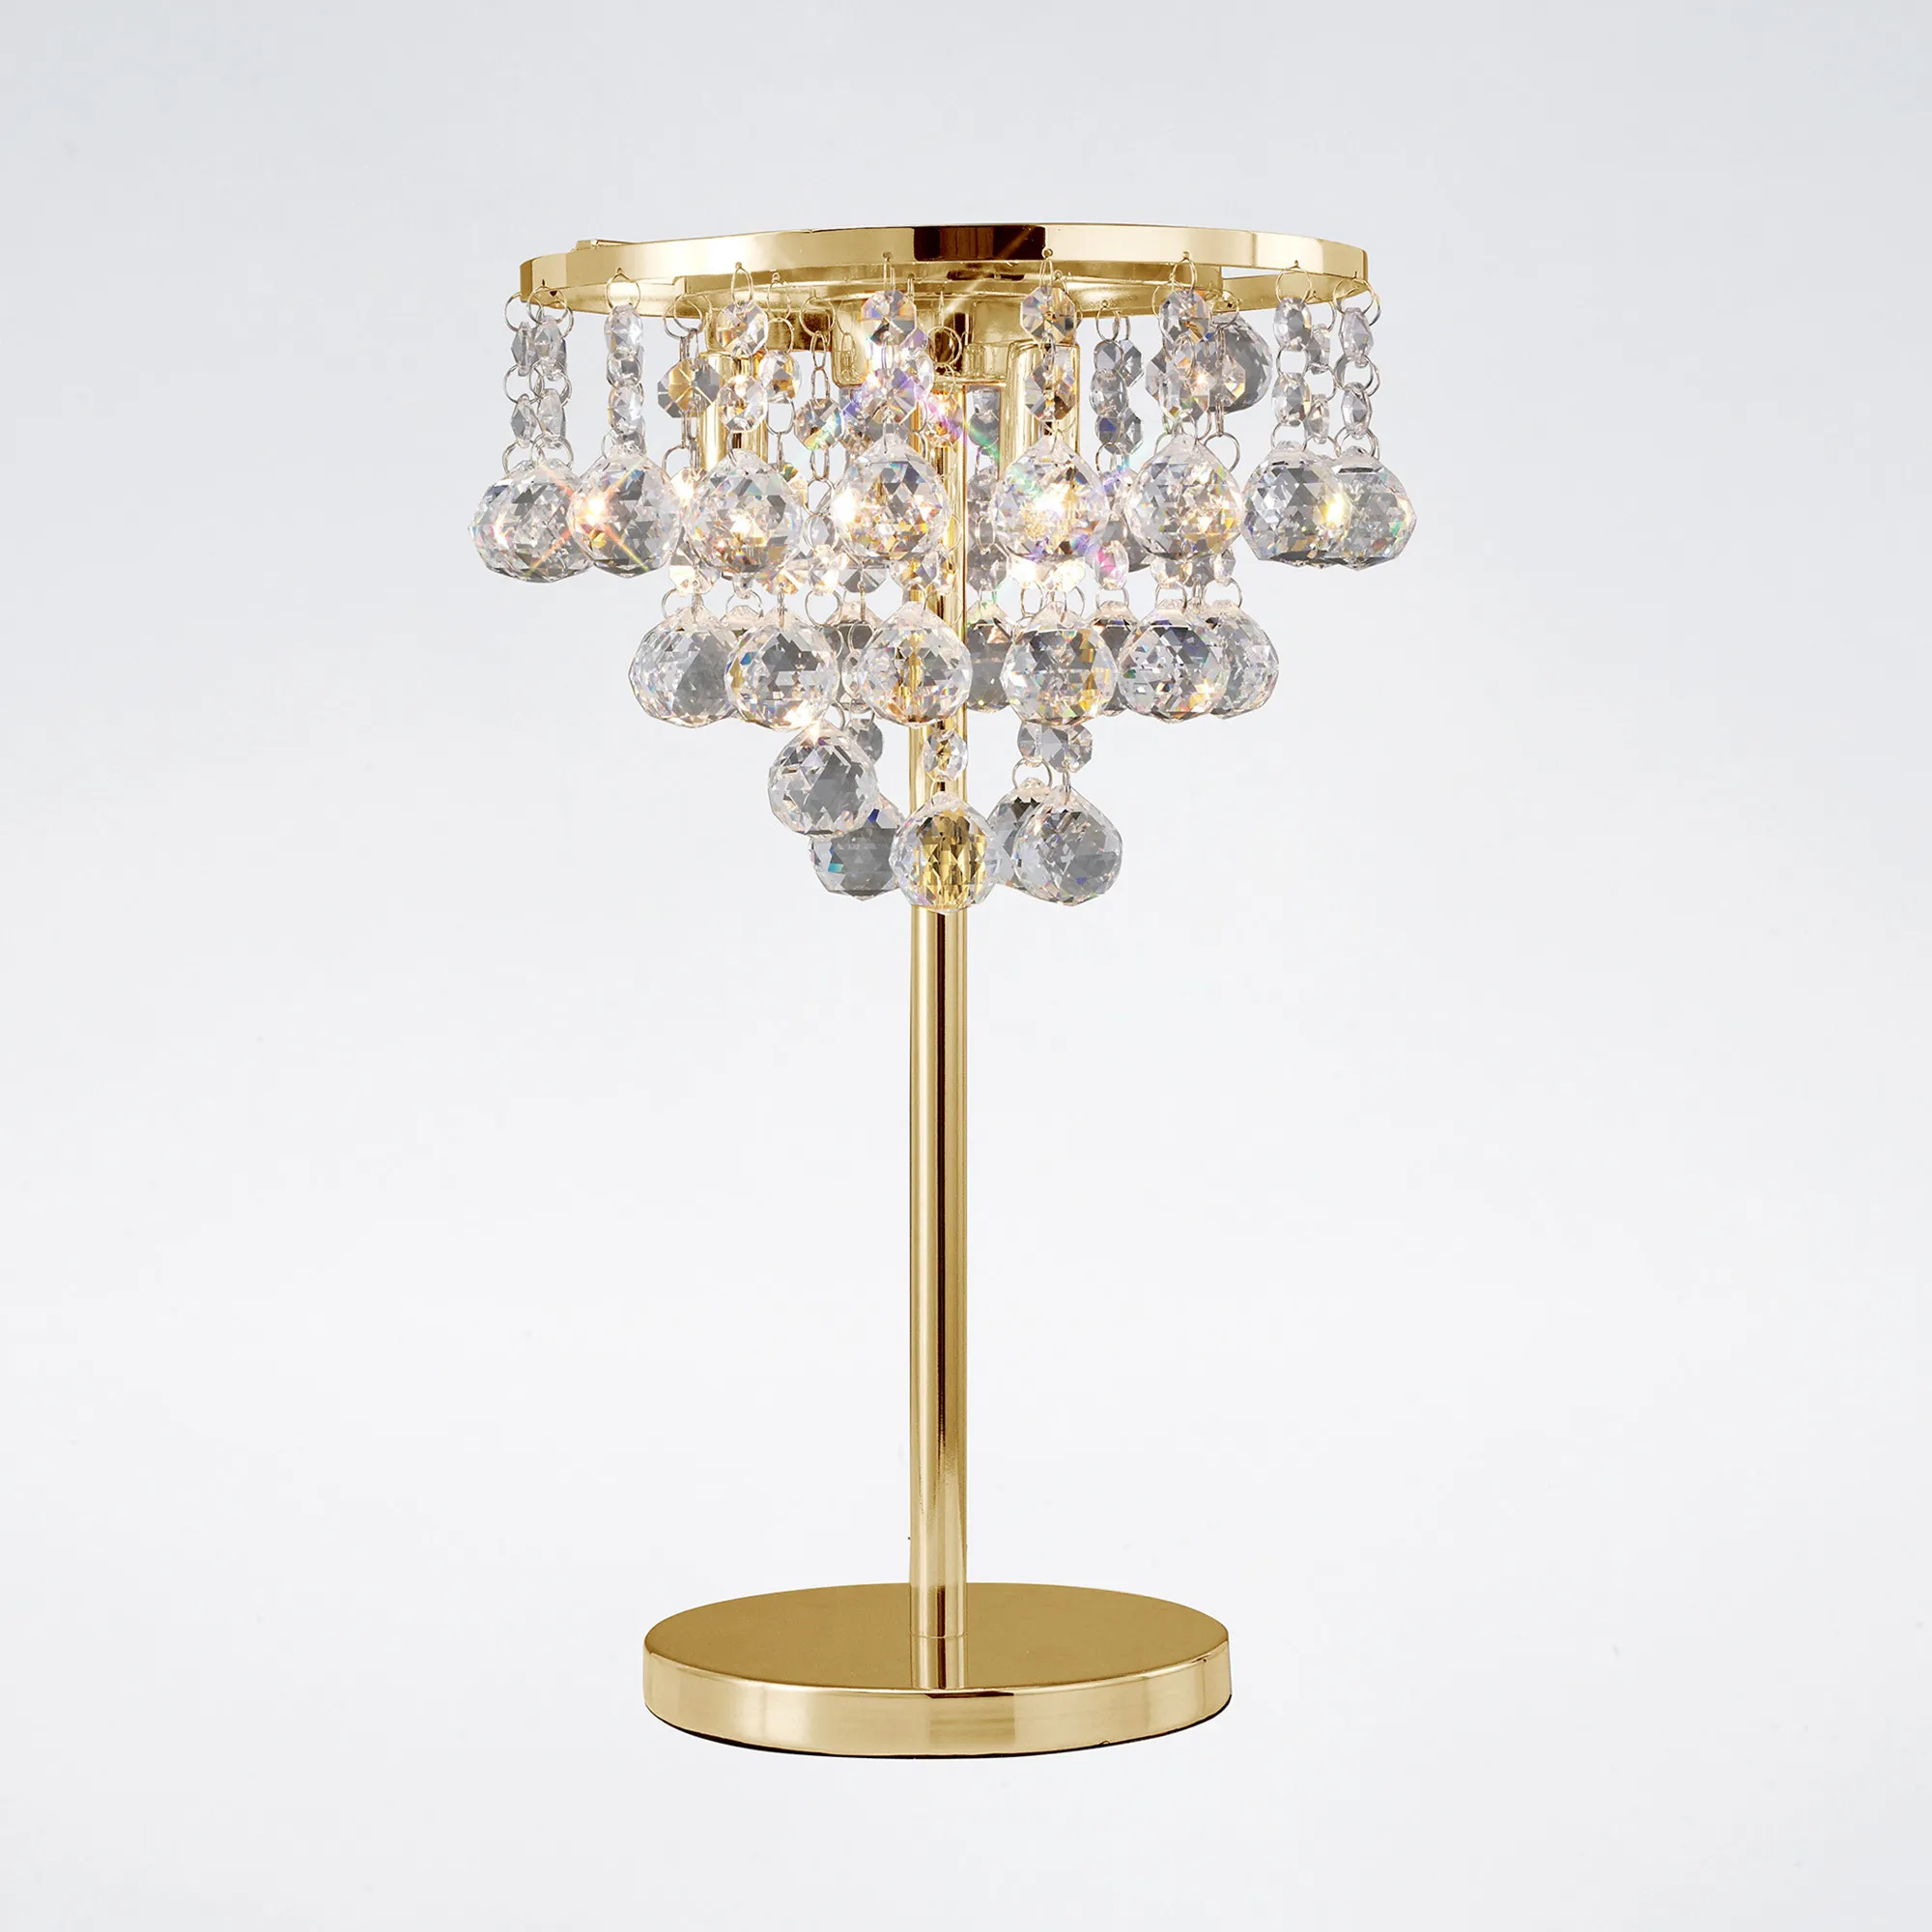 IL30031  Atla Crystal 40cm 3 Light Table Lamp French Gold